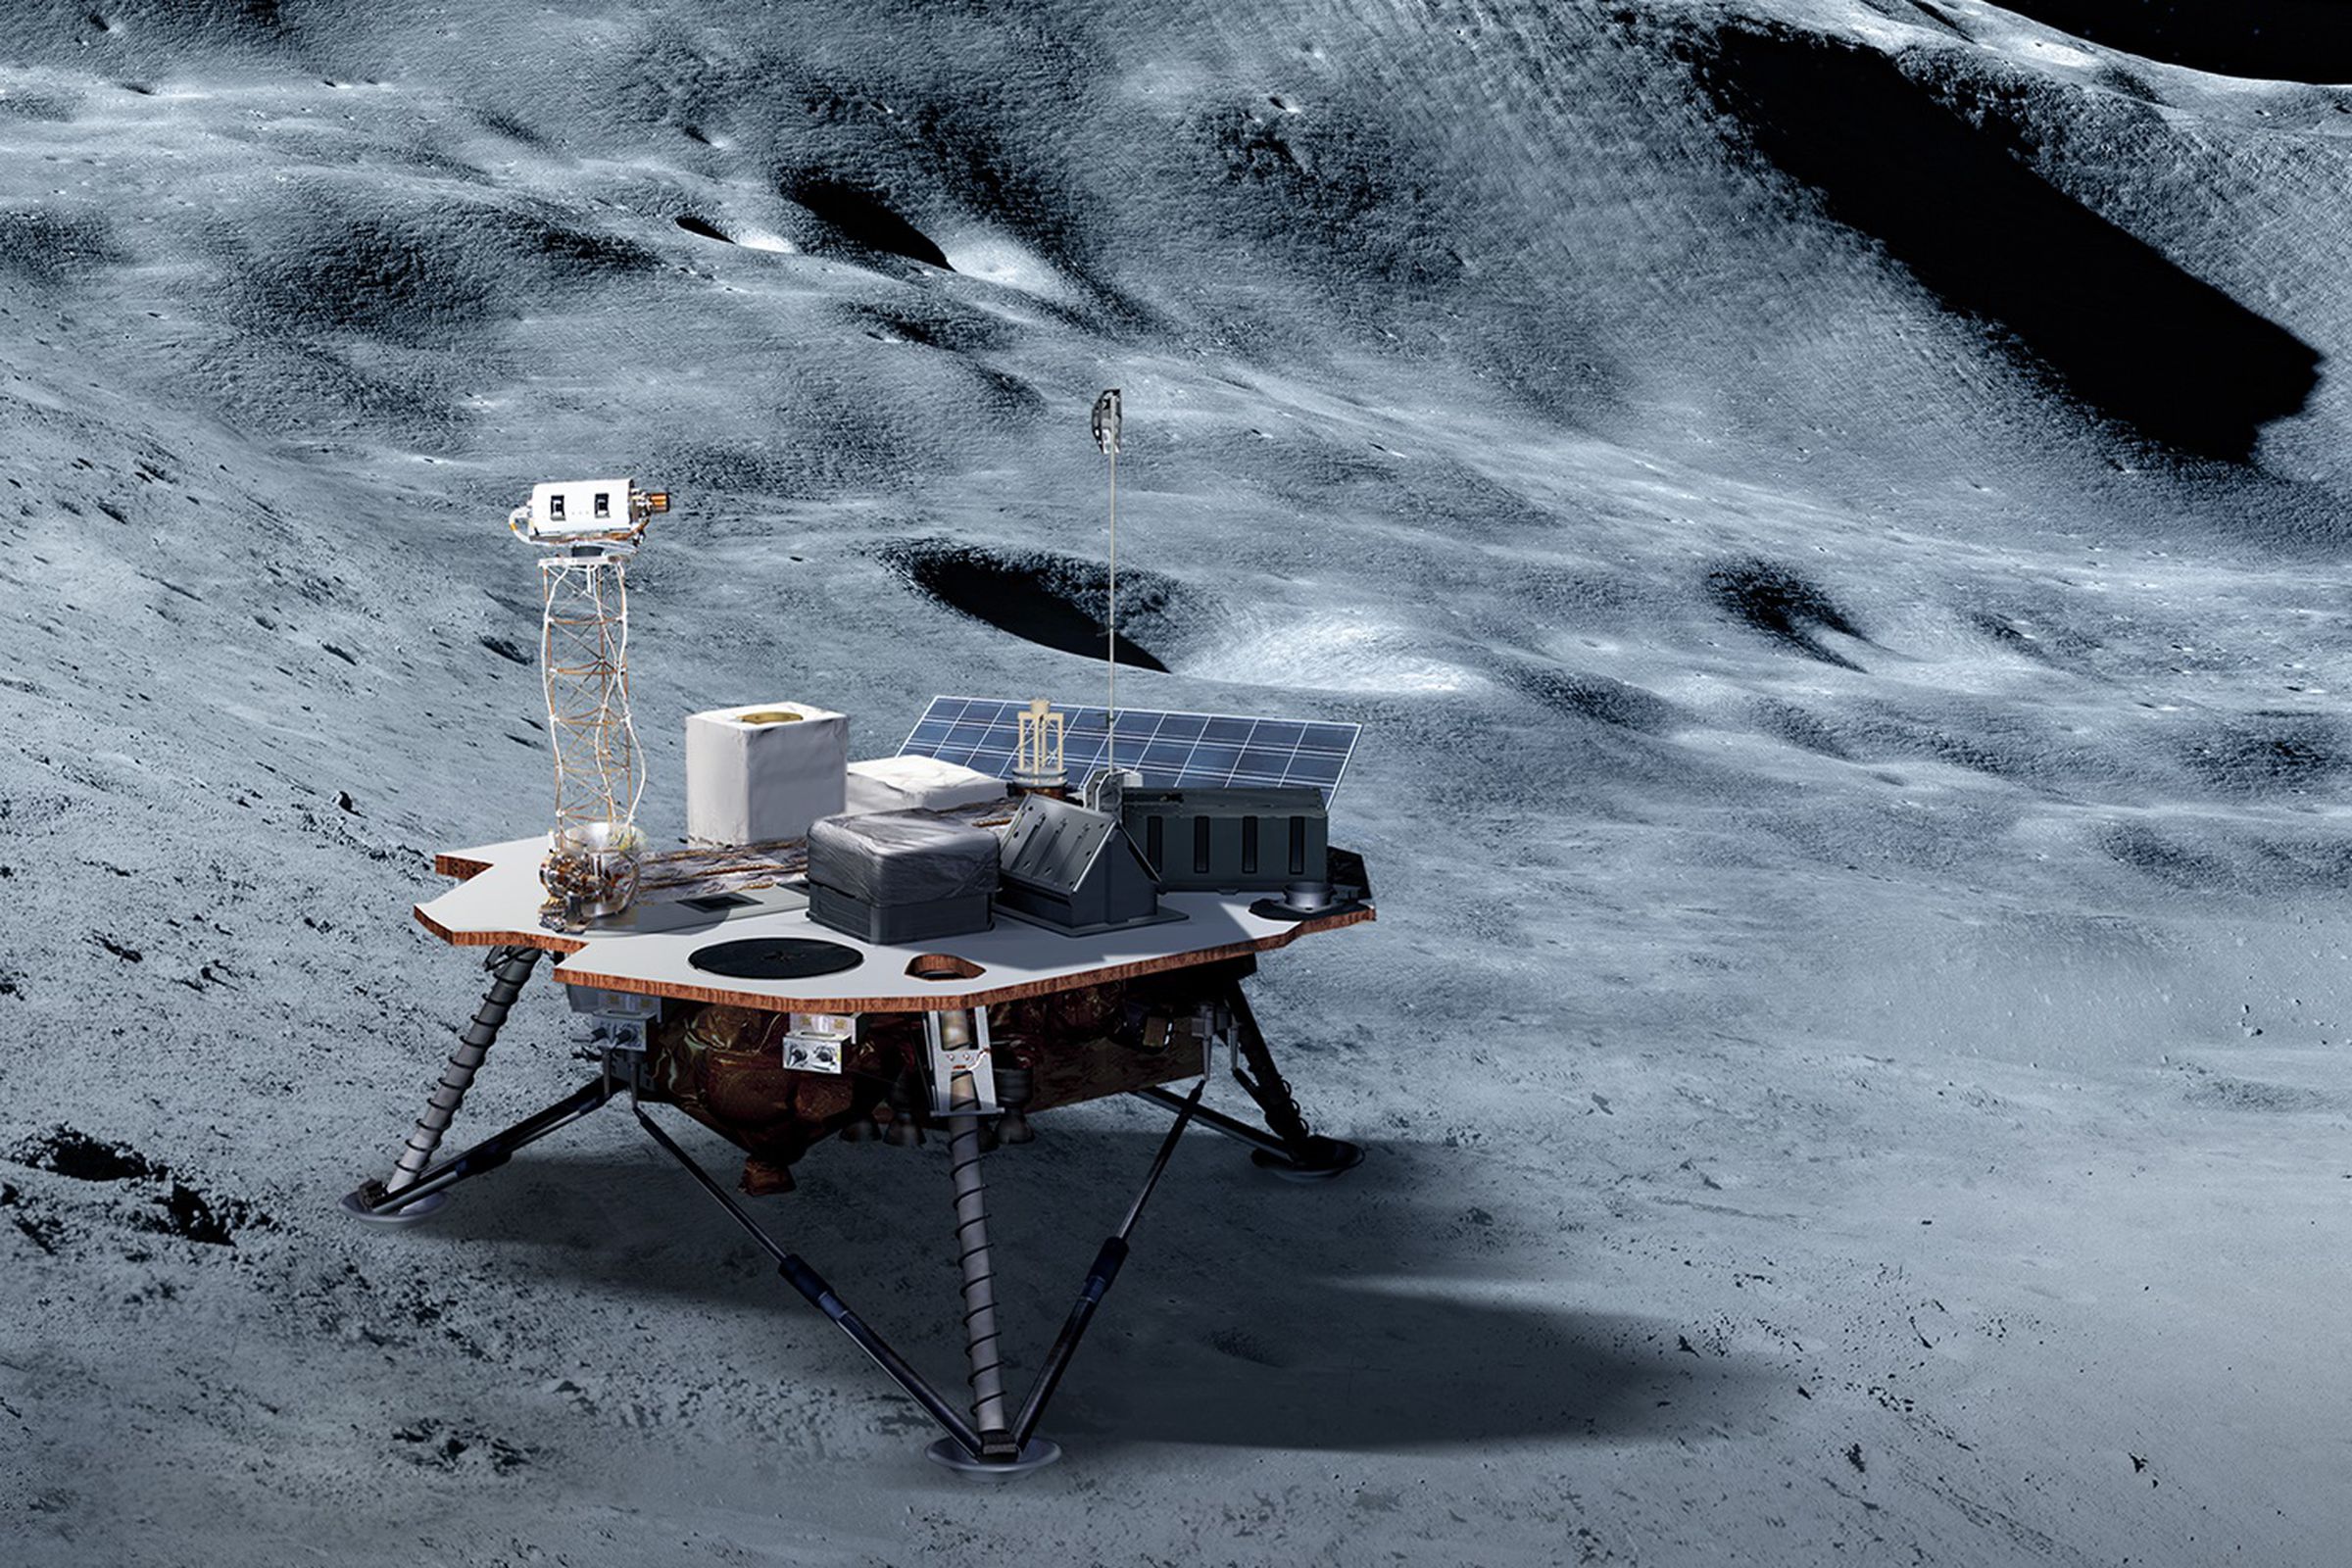 An artistic rendering of a robotic lander on the Moon’s surface.